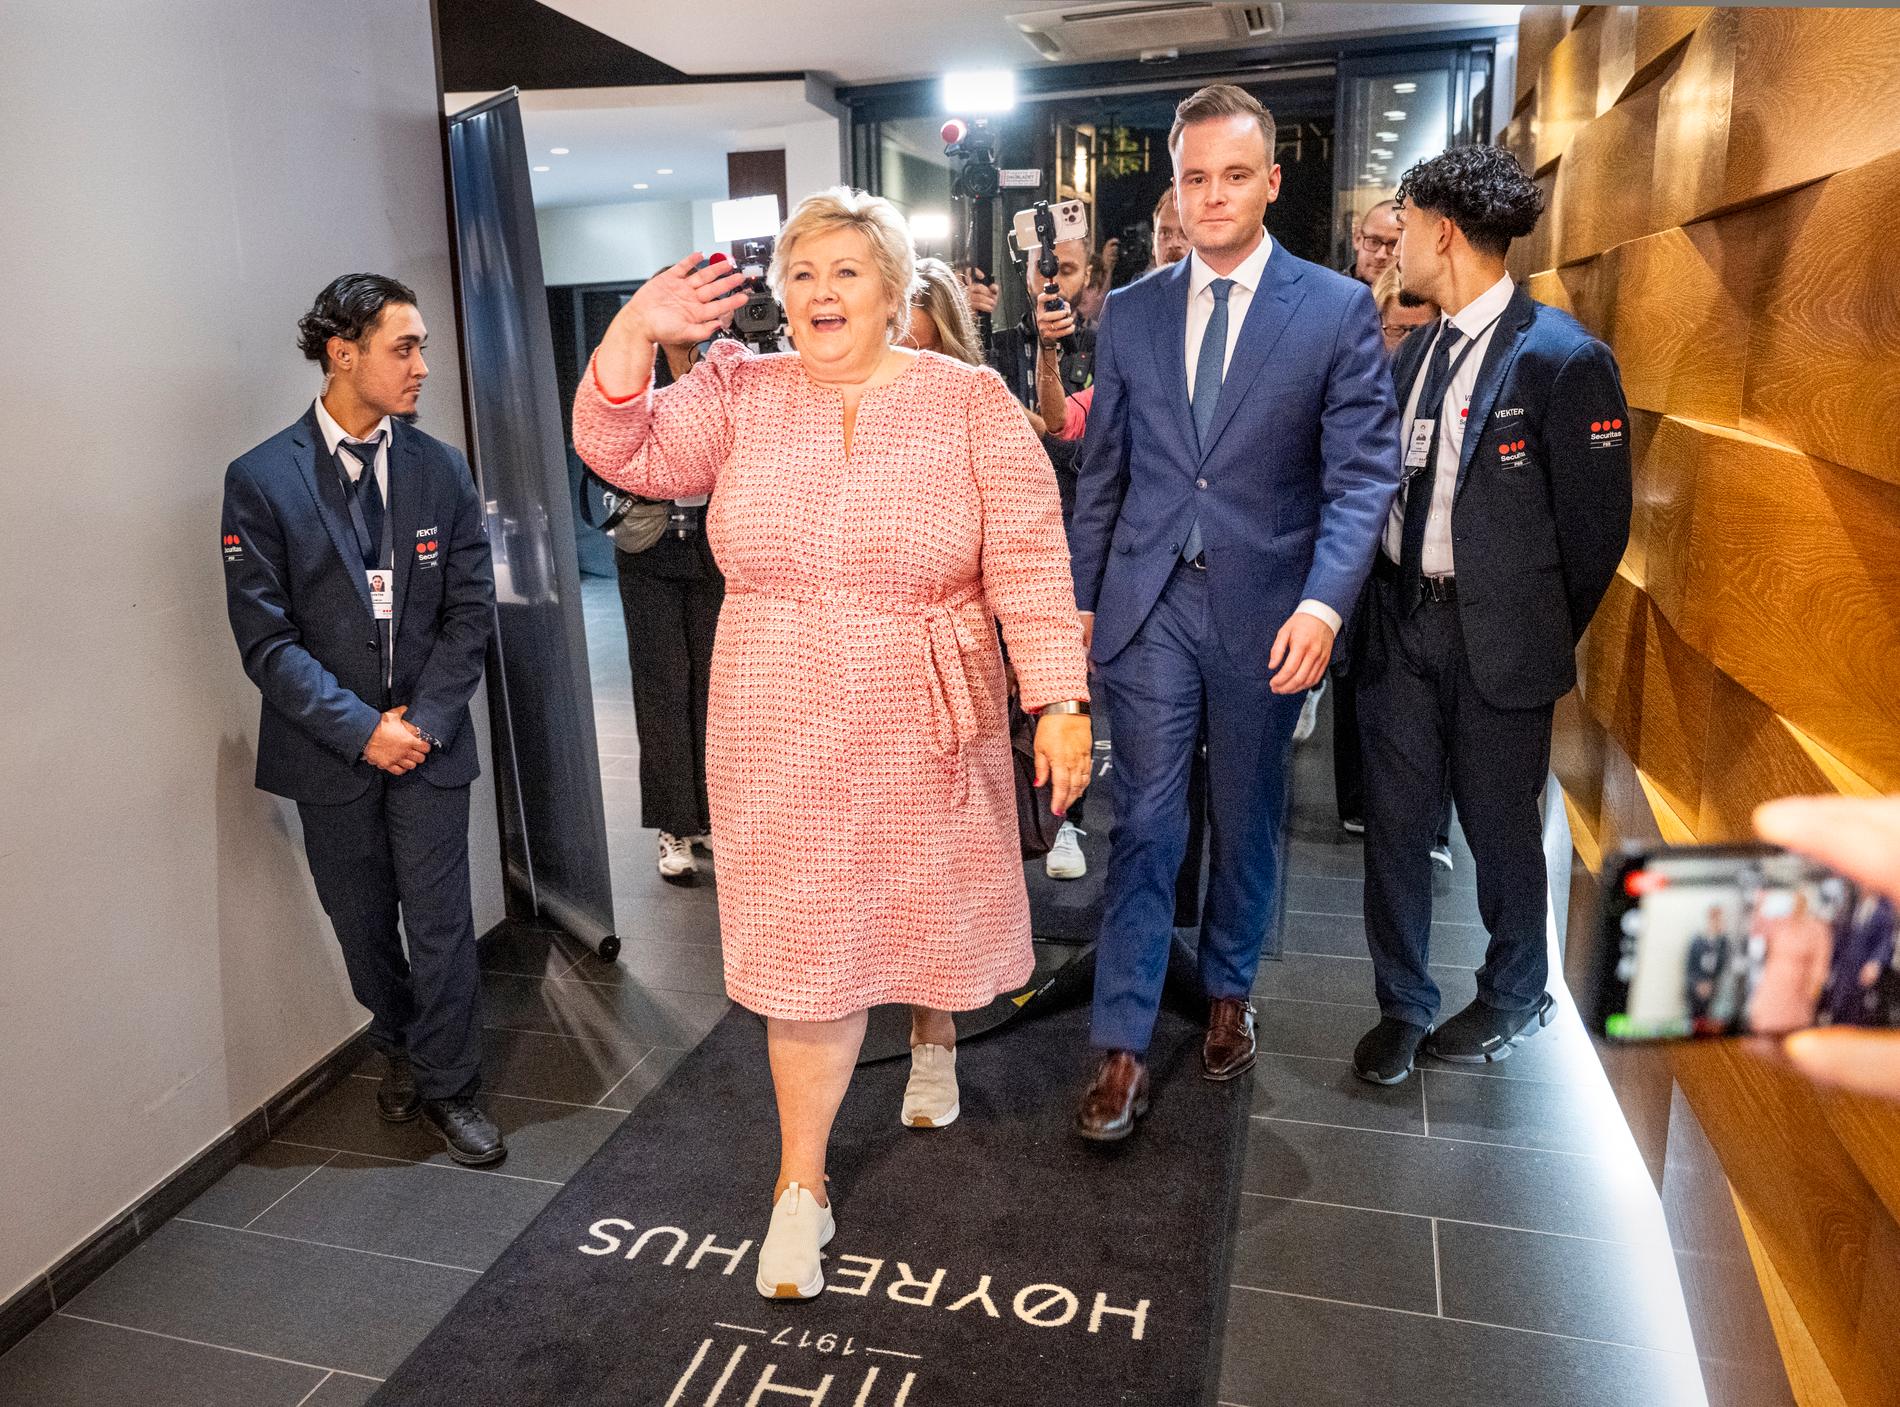 FROM UP TO DOWN: The Conservatives won the local elections last Monday.  On Friday of the same week, Erna Solberg had to admit that her husband's share actions had made her ineligible. 